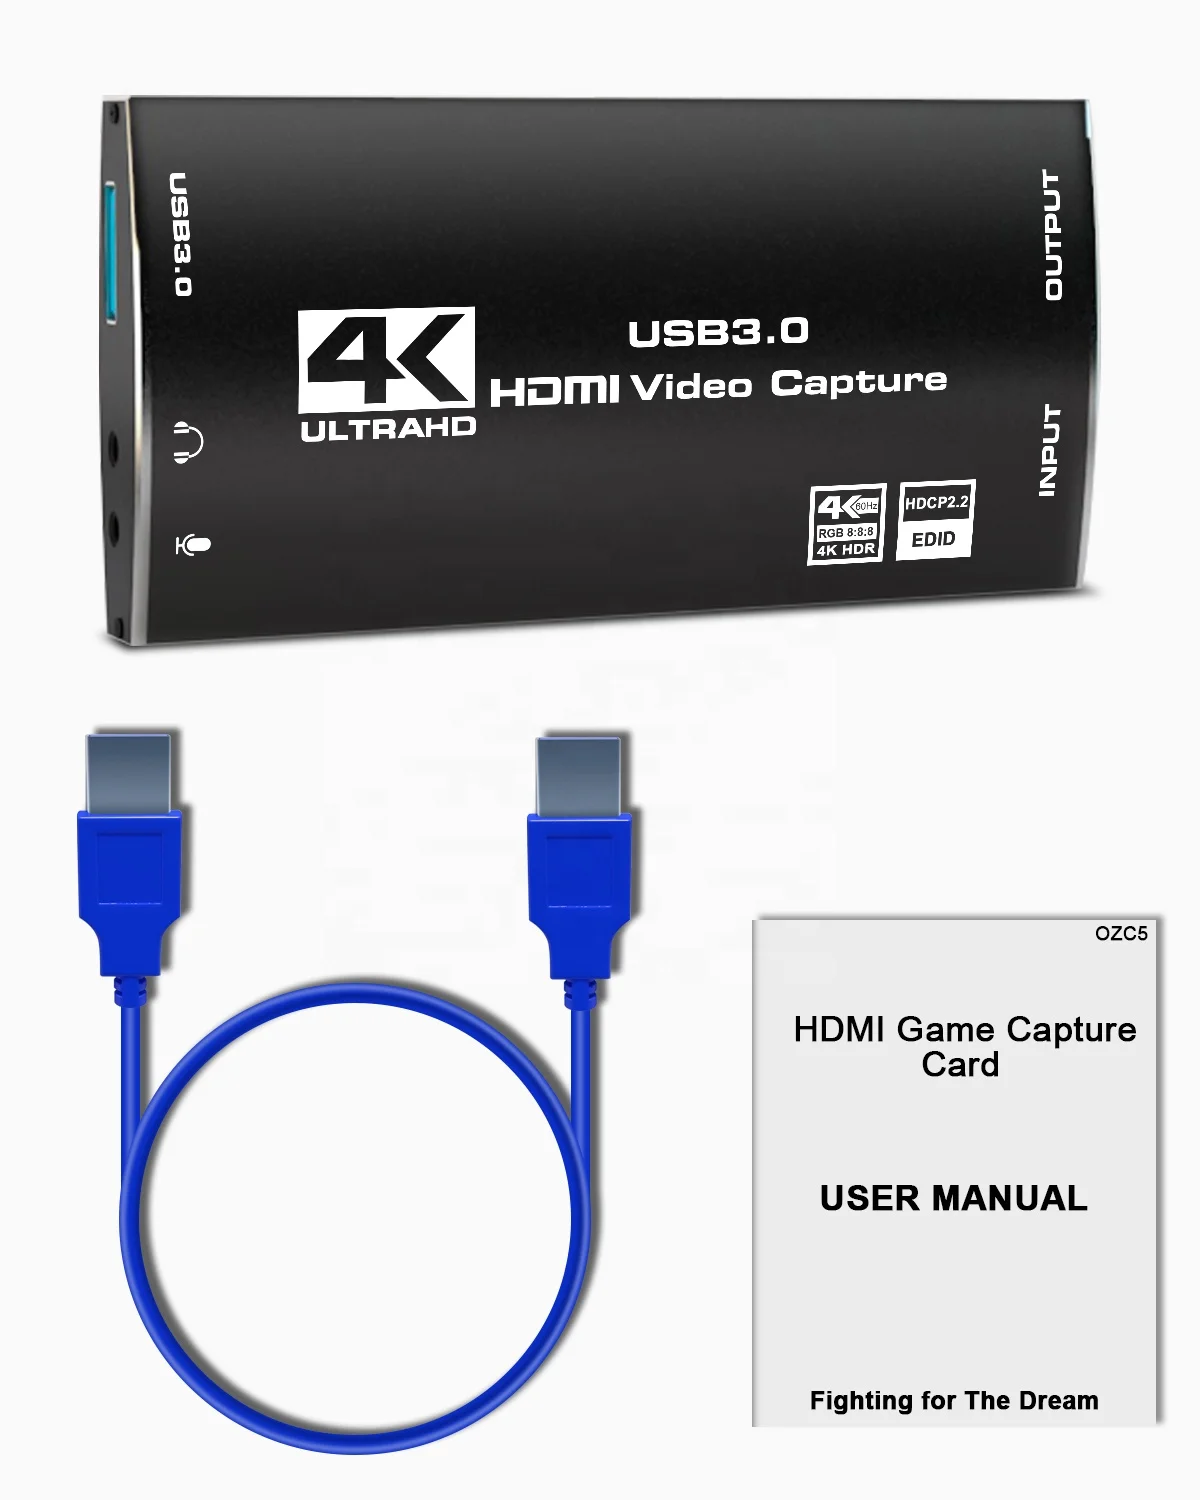 
4k@60Hz HDMI Input to 4K 60Hz HDMI Output,4K 60FPS to USB 3.0 4K 30FPS Video Game Capture Device Card for Live Streaming Gaming 